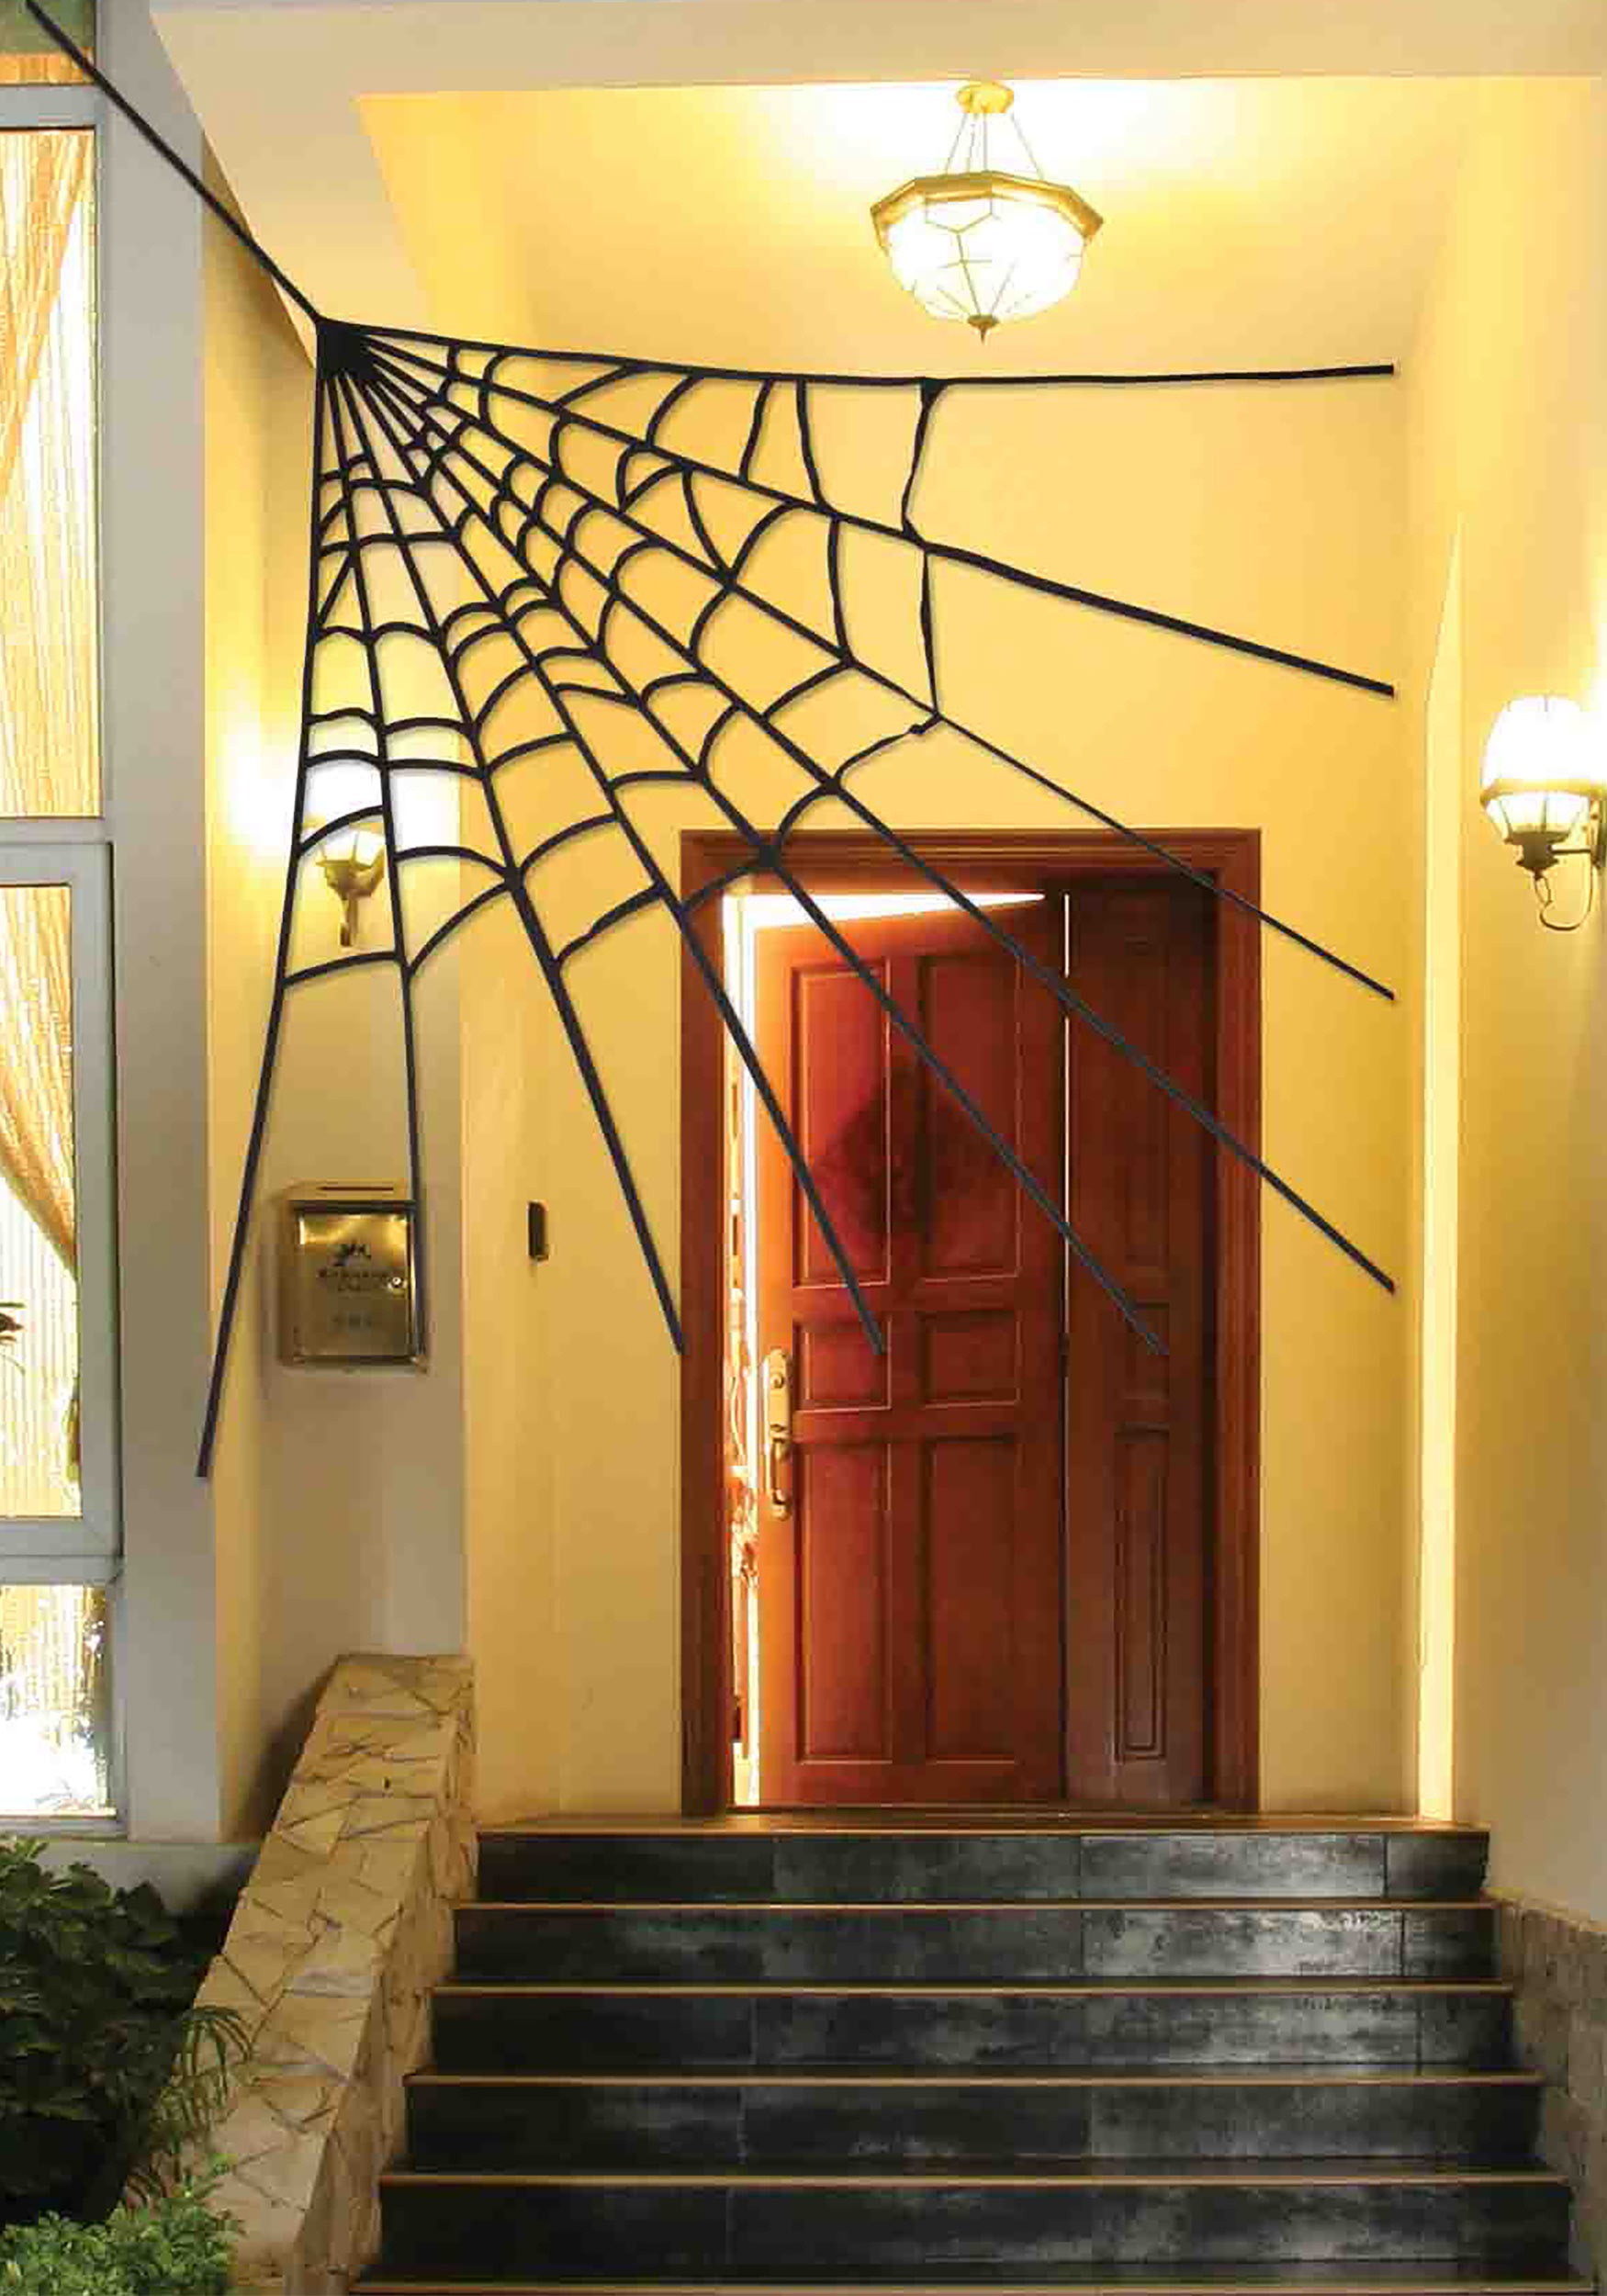 52 Best Photos How To Use Spider Web Decorations / Halloween Decorations Spiders & Web to Spook up Everyone